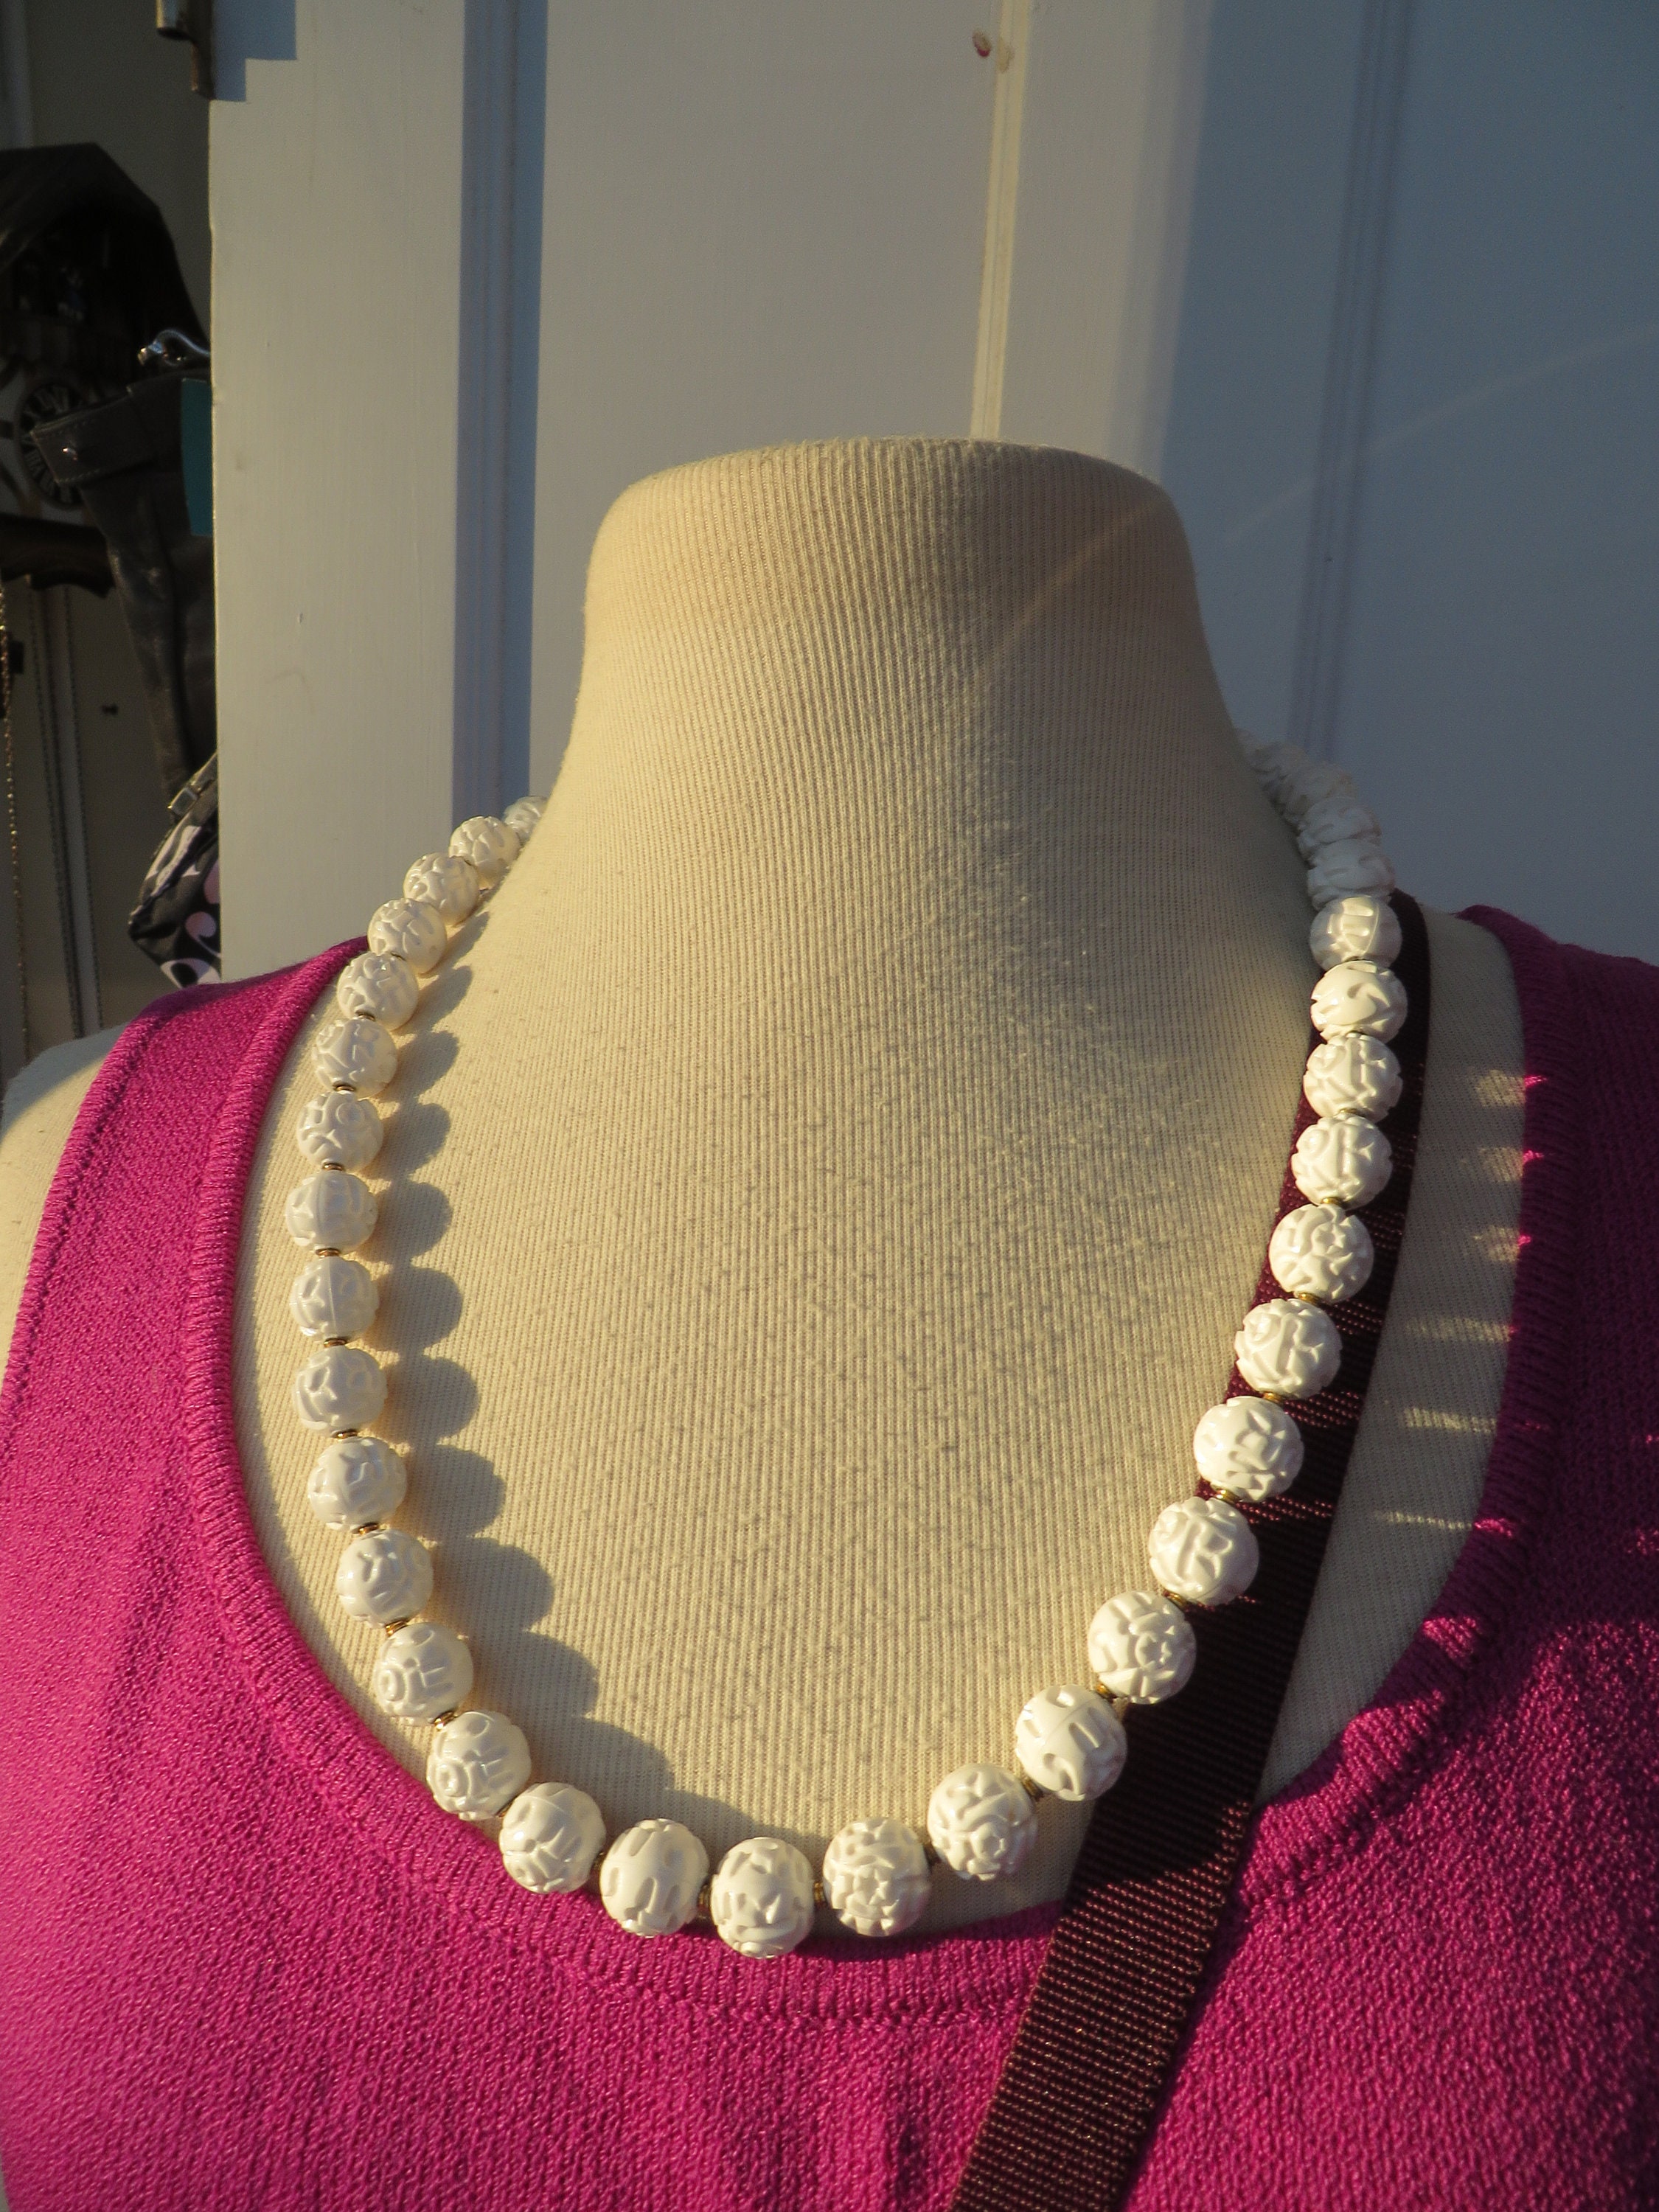 Wedding Sewing Quality Acrylic Faux Large Pearls, Pearl Beads With Holes,  Ivory Pearl Beads Five Big Sizes 10.12.14.16.18mm 